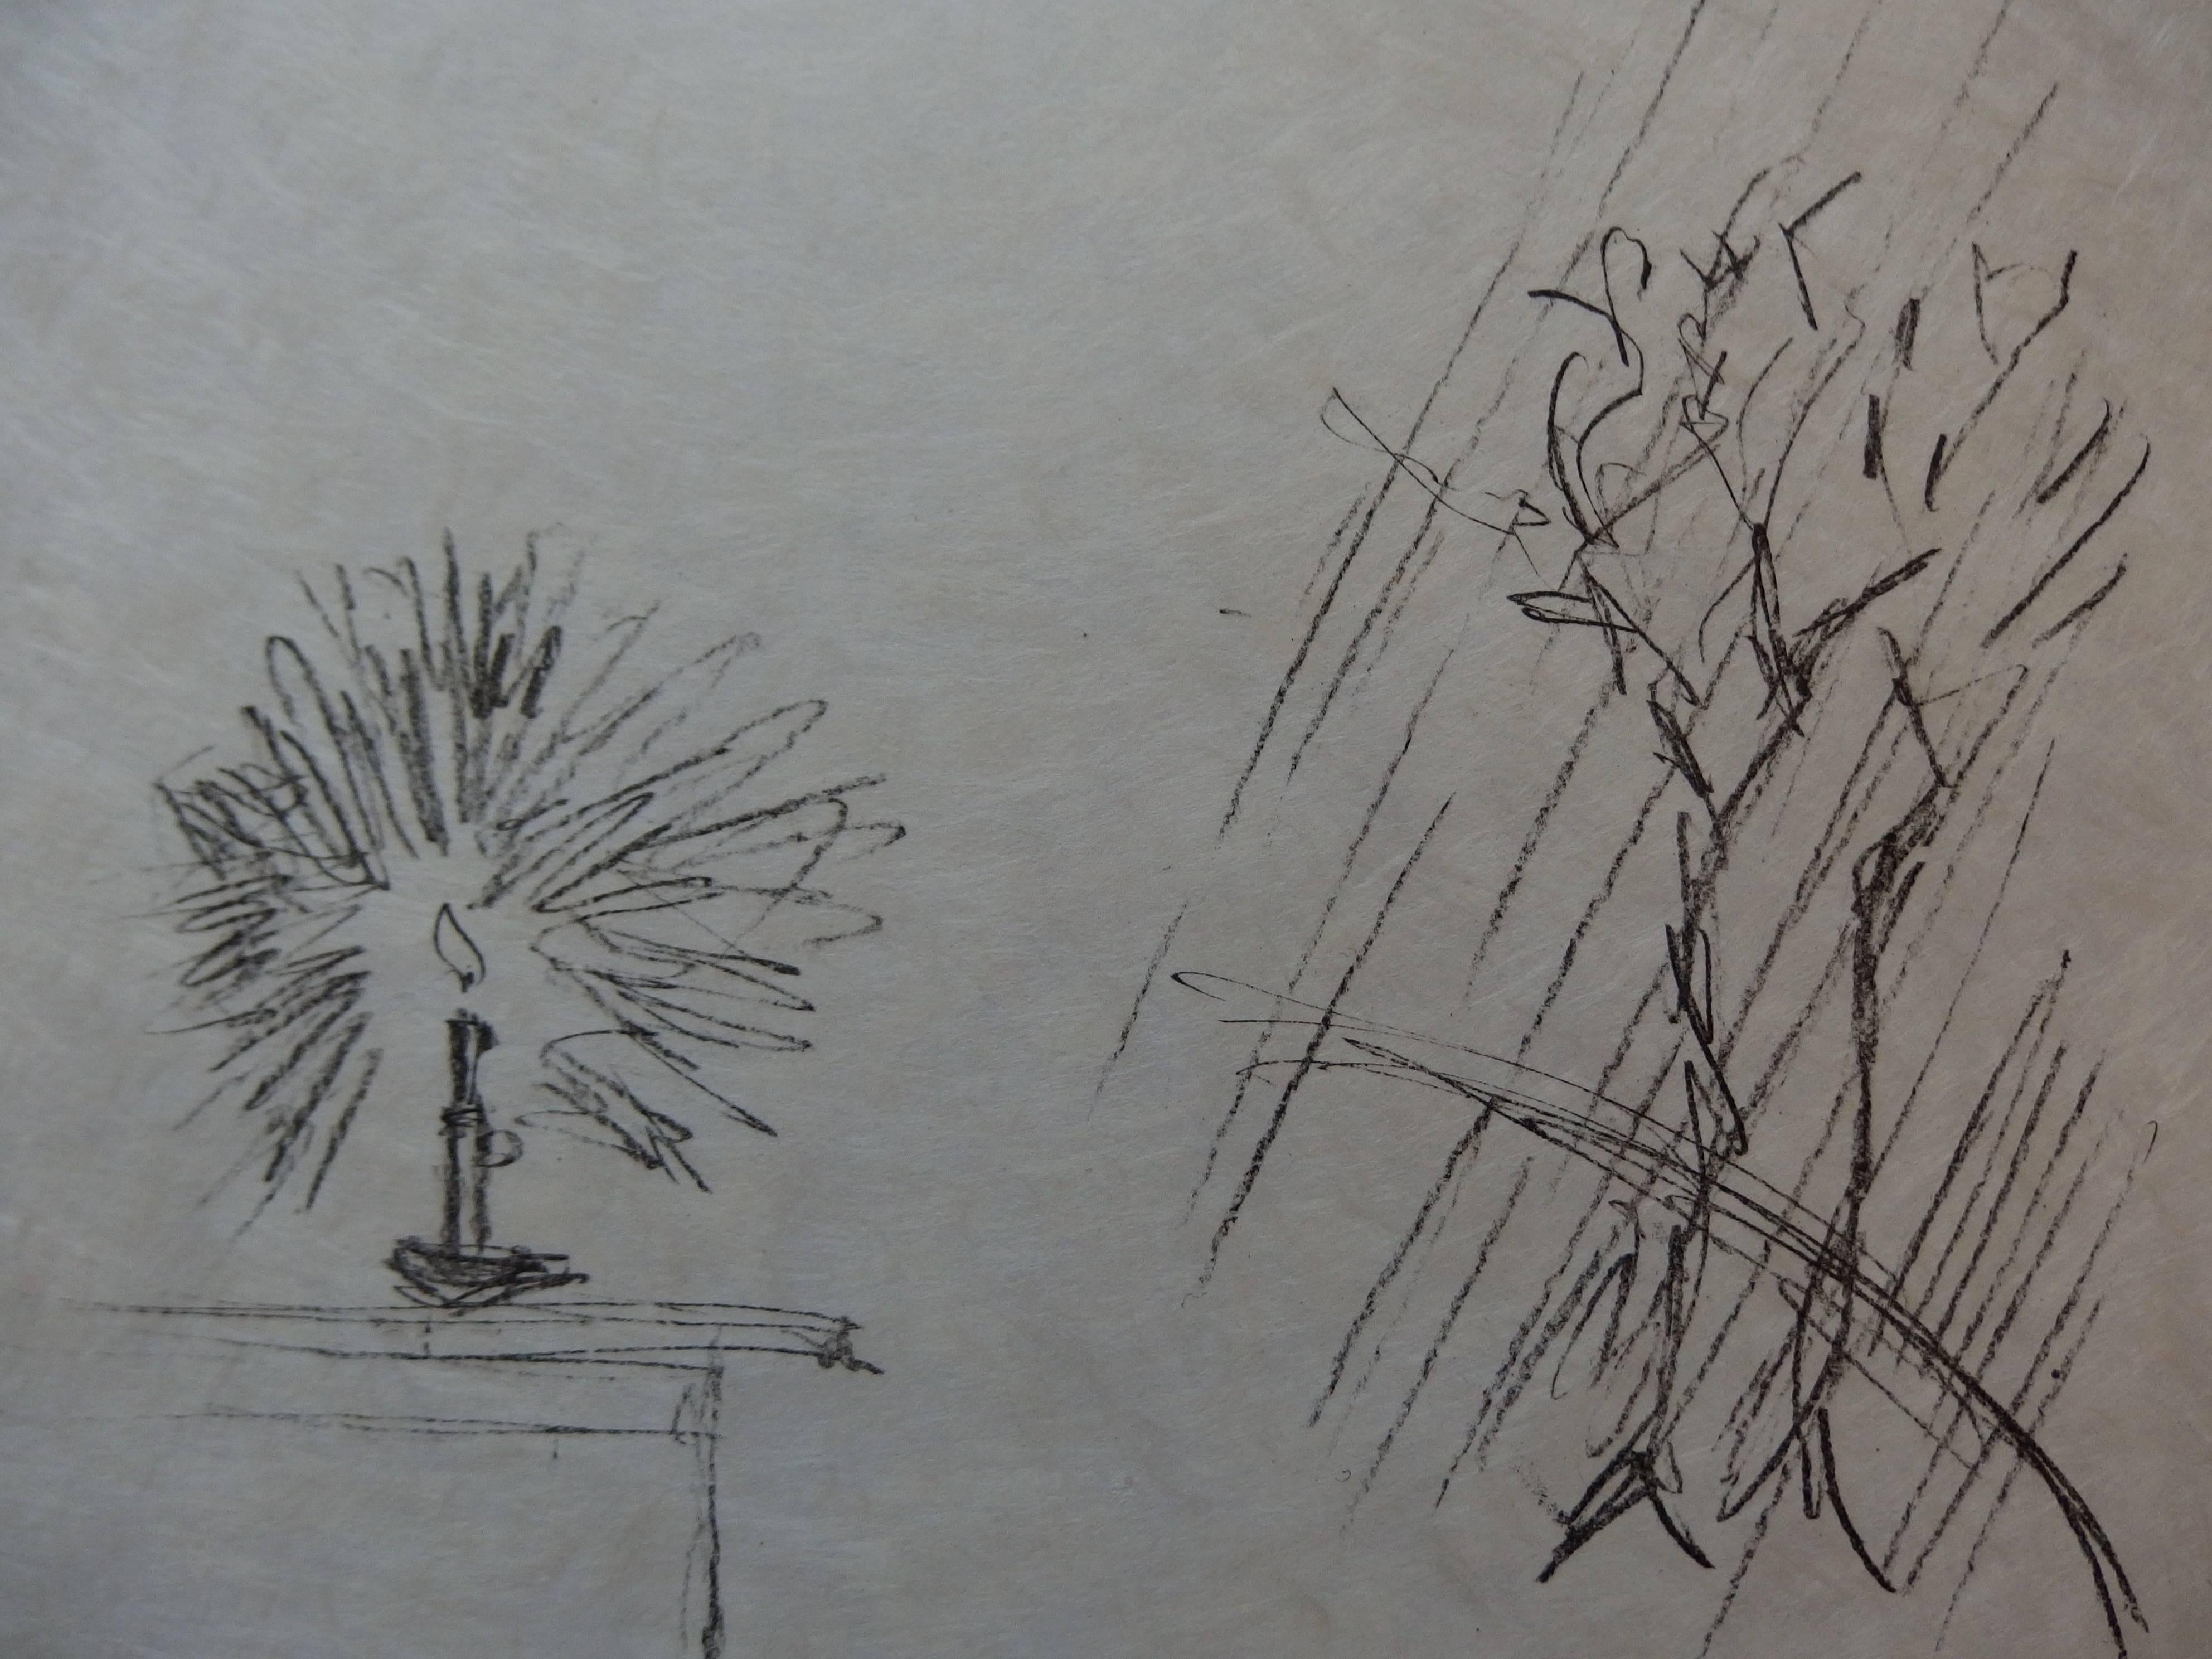 The Candle - Original Lithograph - Handsigned & Limited 23copies / 1961 - Gray Interior Print by Alberto Giacometti